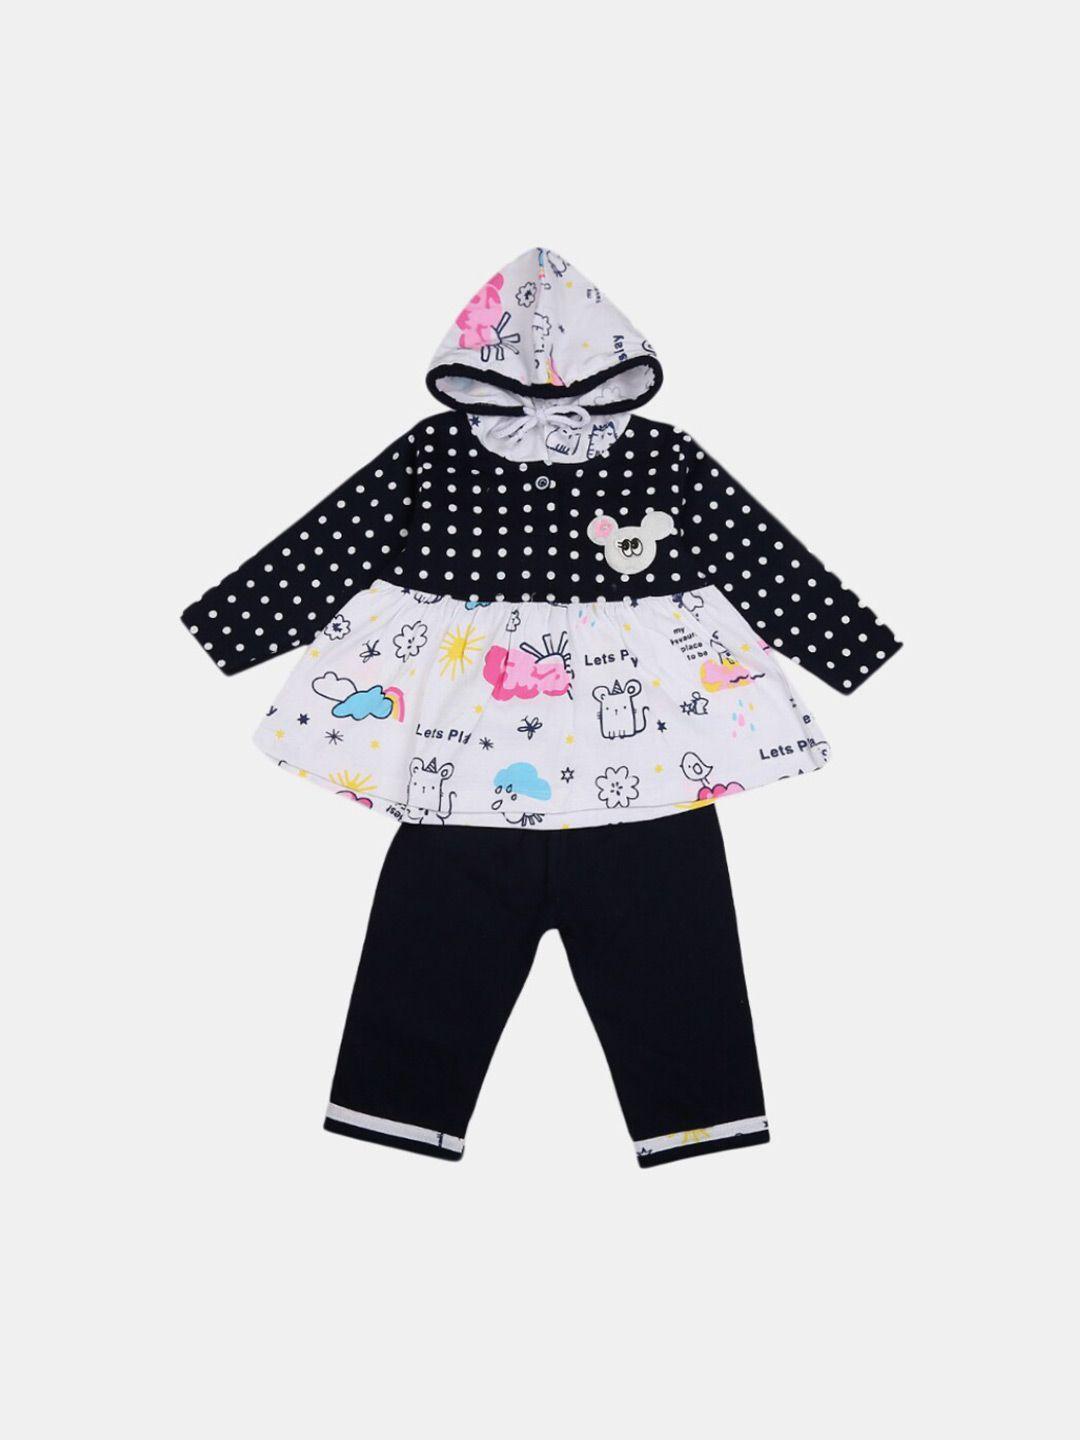 v-mart kids pack of 2 conversational printed hooded pure cotton clothing set